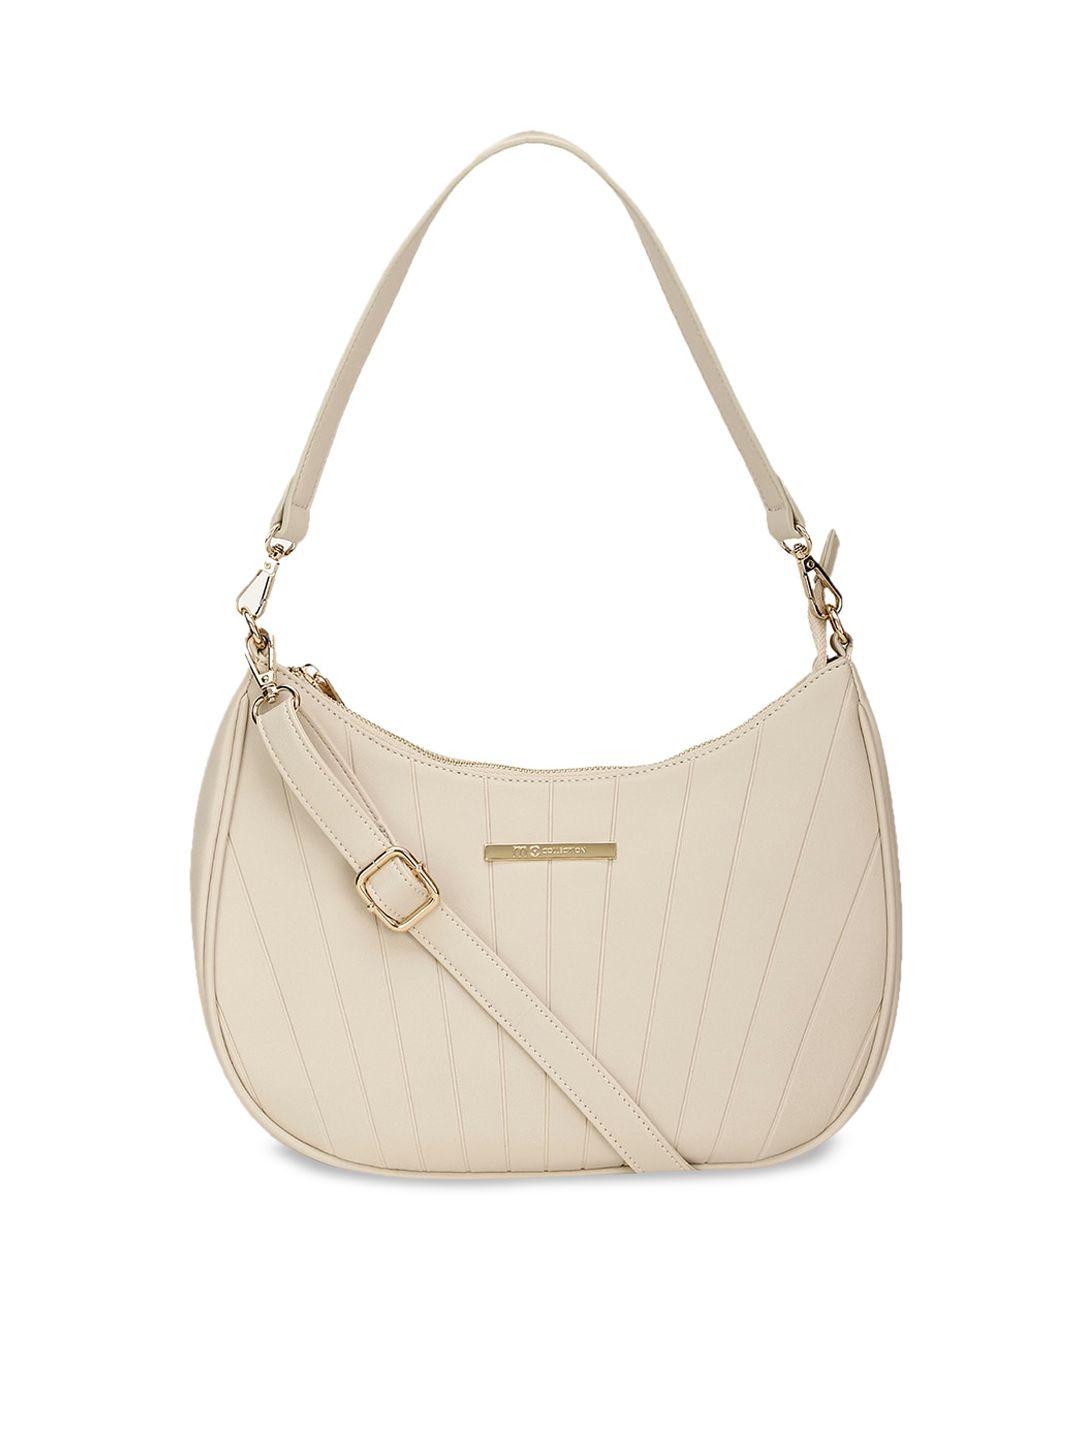 marie claire off white textured half moon hobo bag